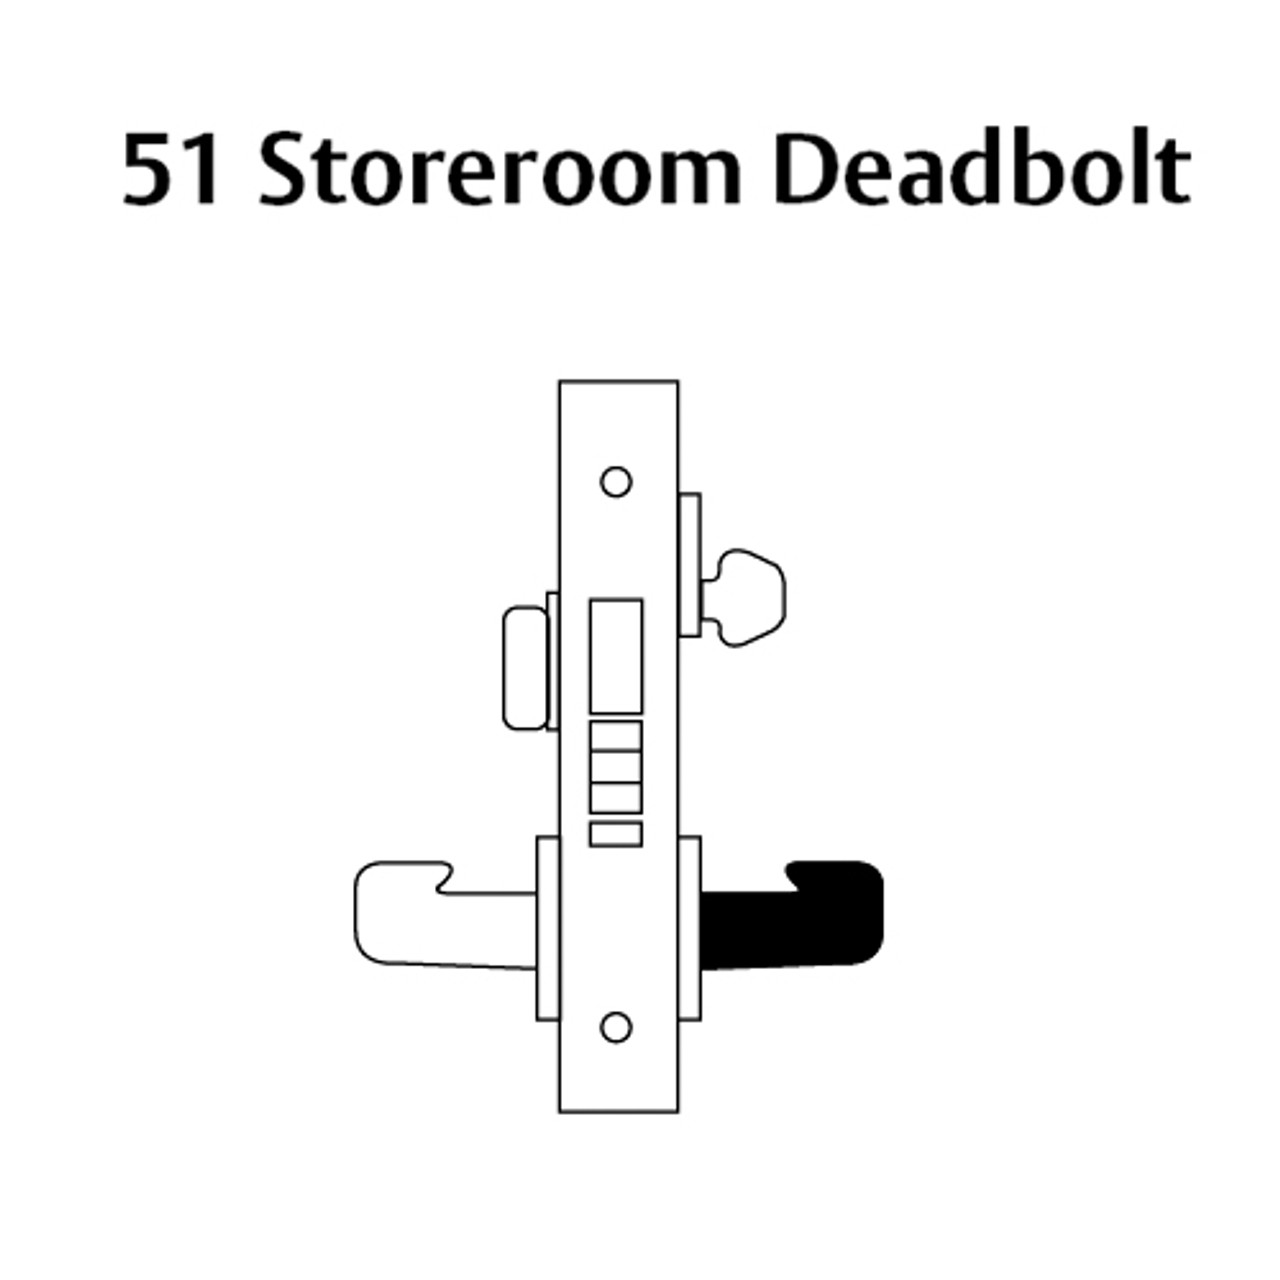 8251-LNW-26D Sargent 8200 Series Storeroom Deadbolt Mortise Lock with LNW Lever Trim and Deadbolt in Satin Chrome